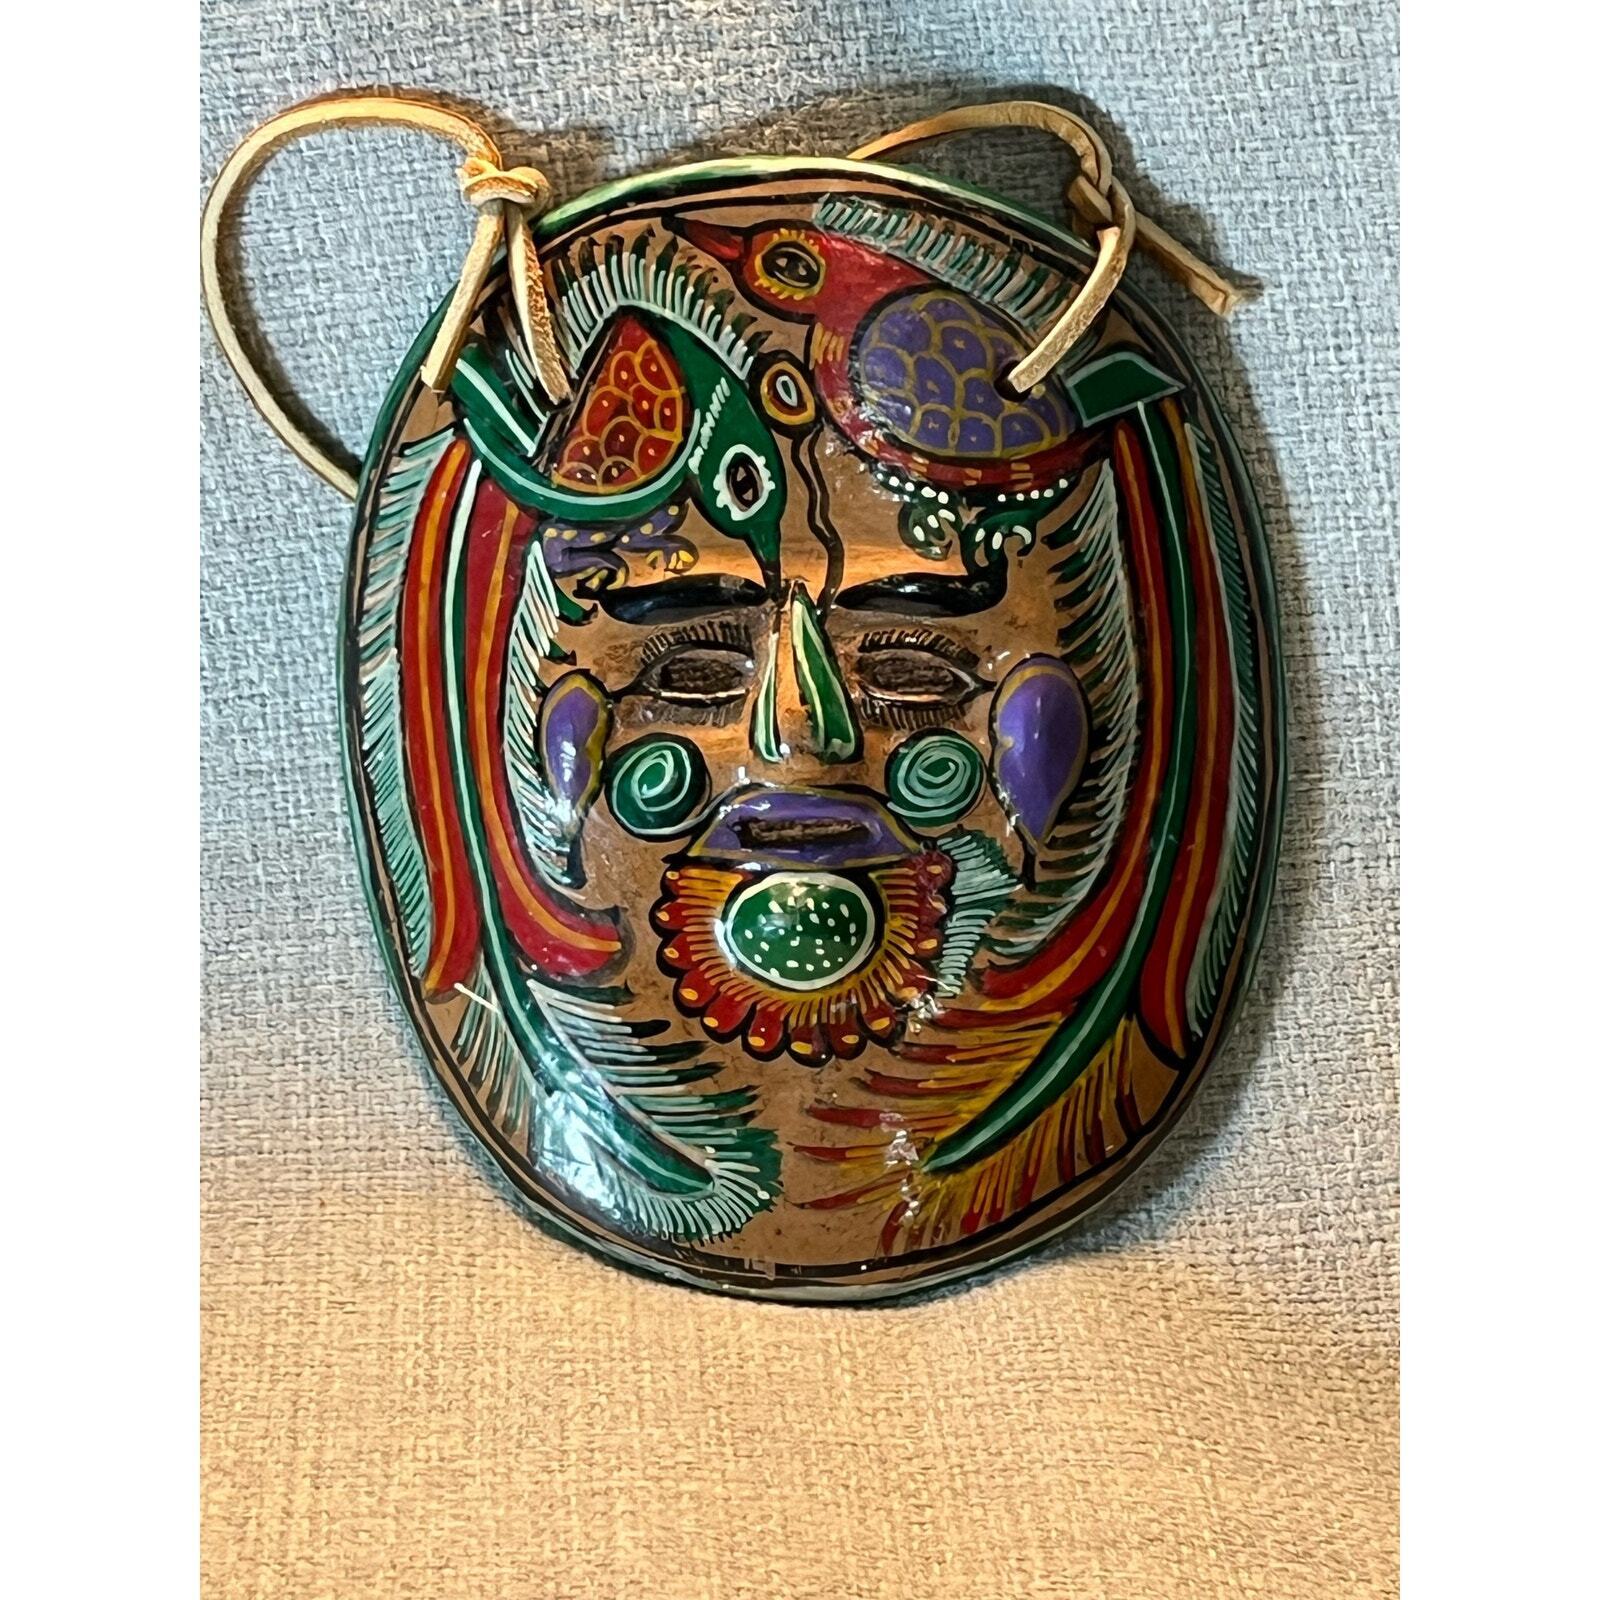 VINTAGE MEXICO MEXICAN TERRA COTTA FOLK ART MASK WALL HANGING  HAND PAINTED